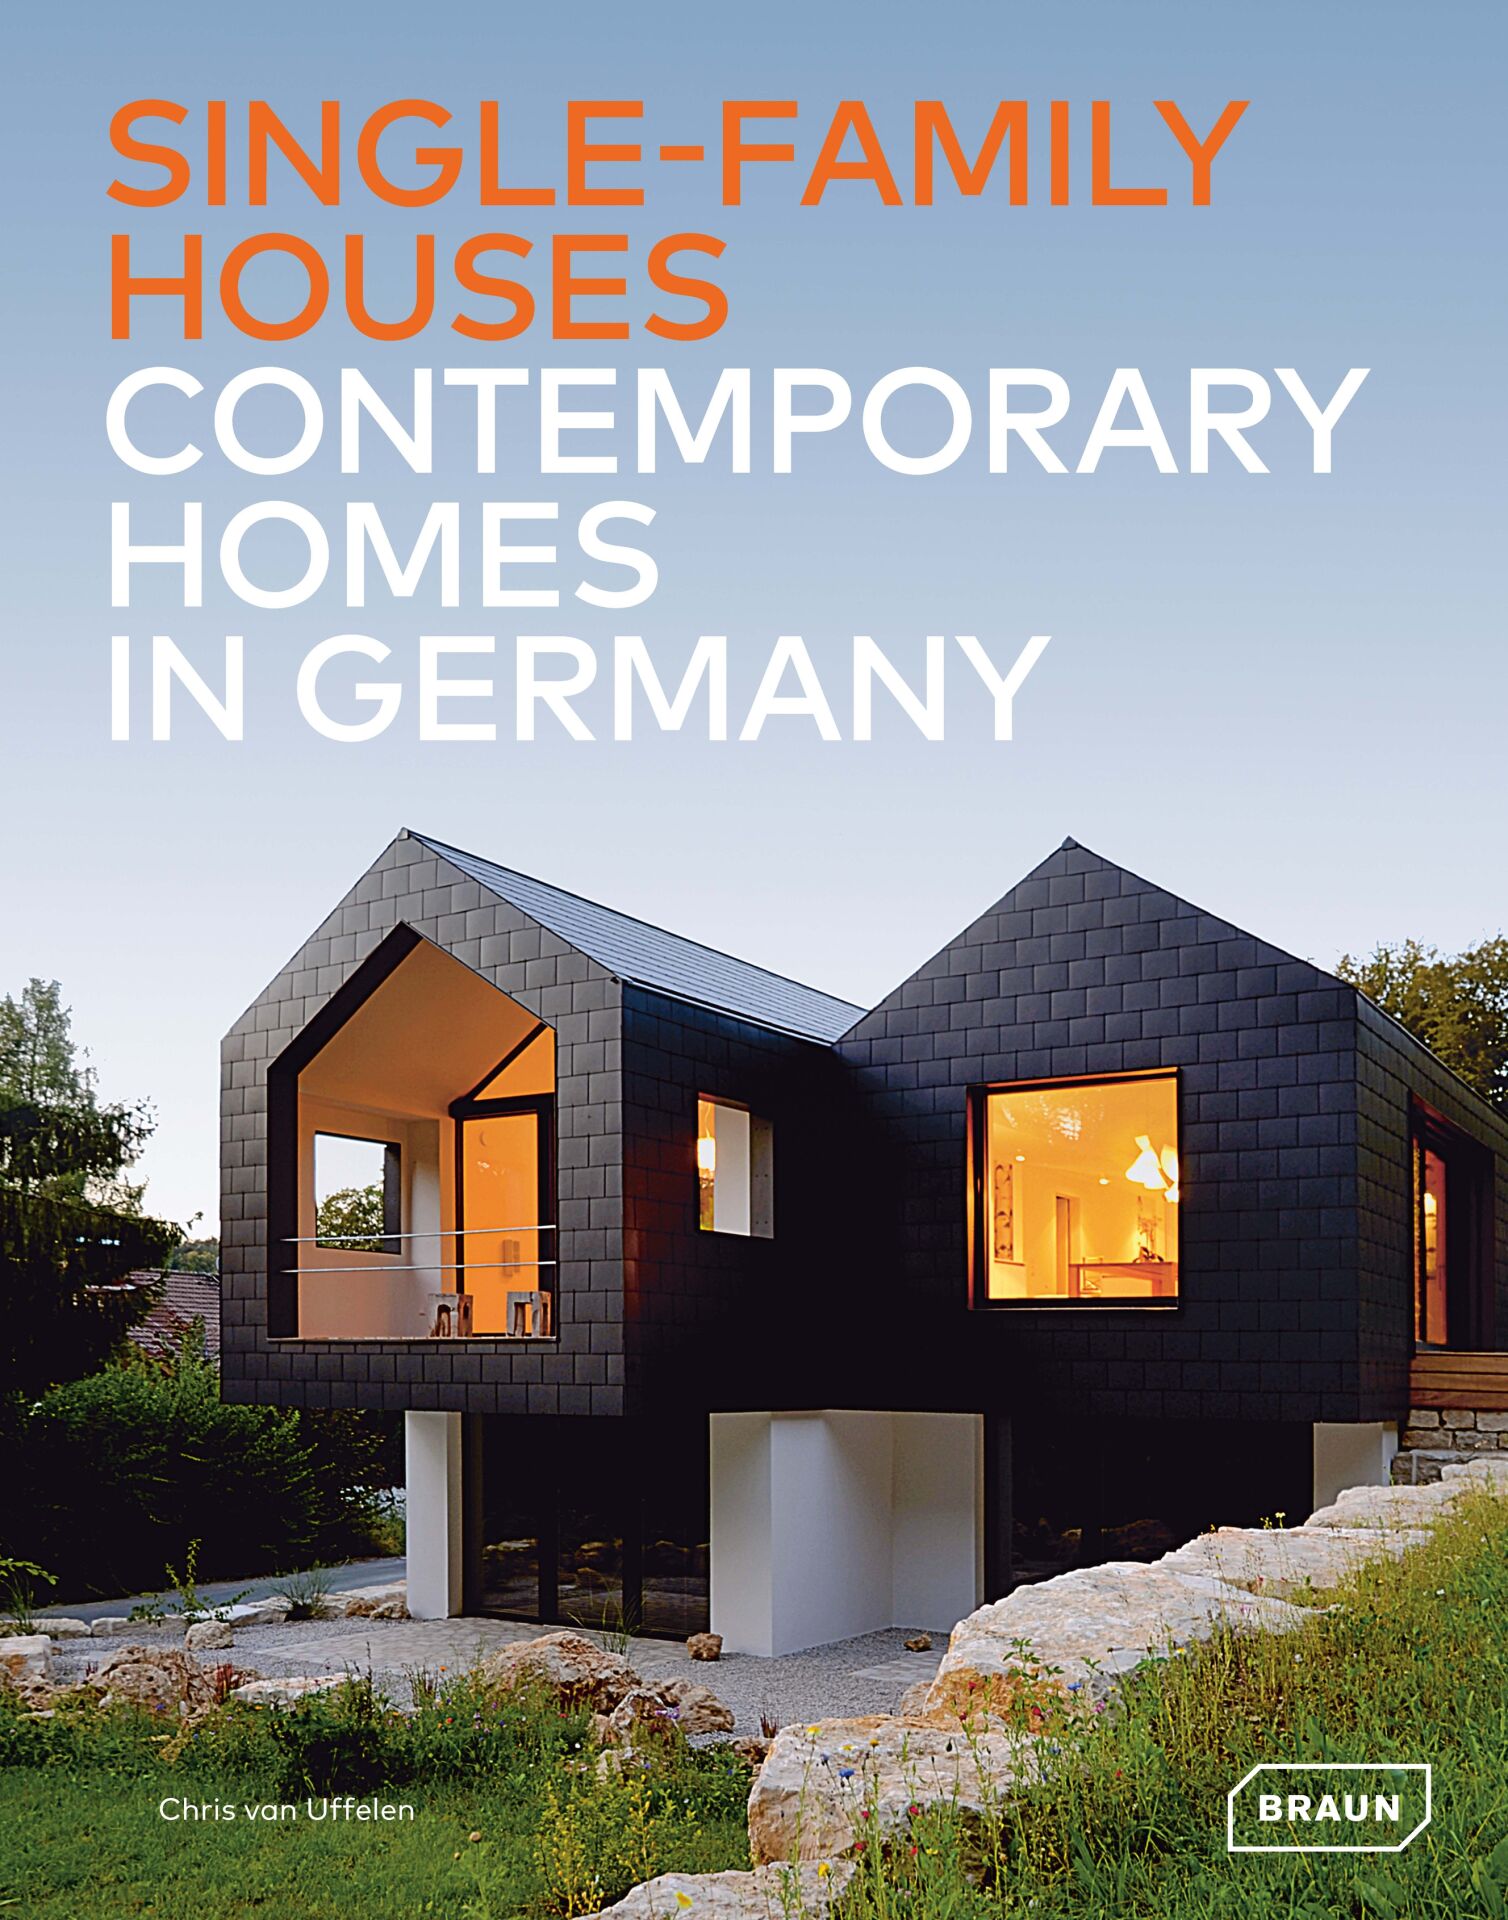 Single-Family Houses:Contemporary Homes in Germany